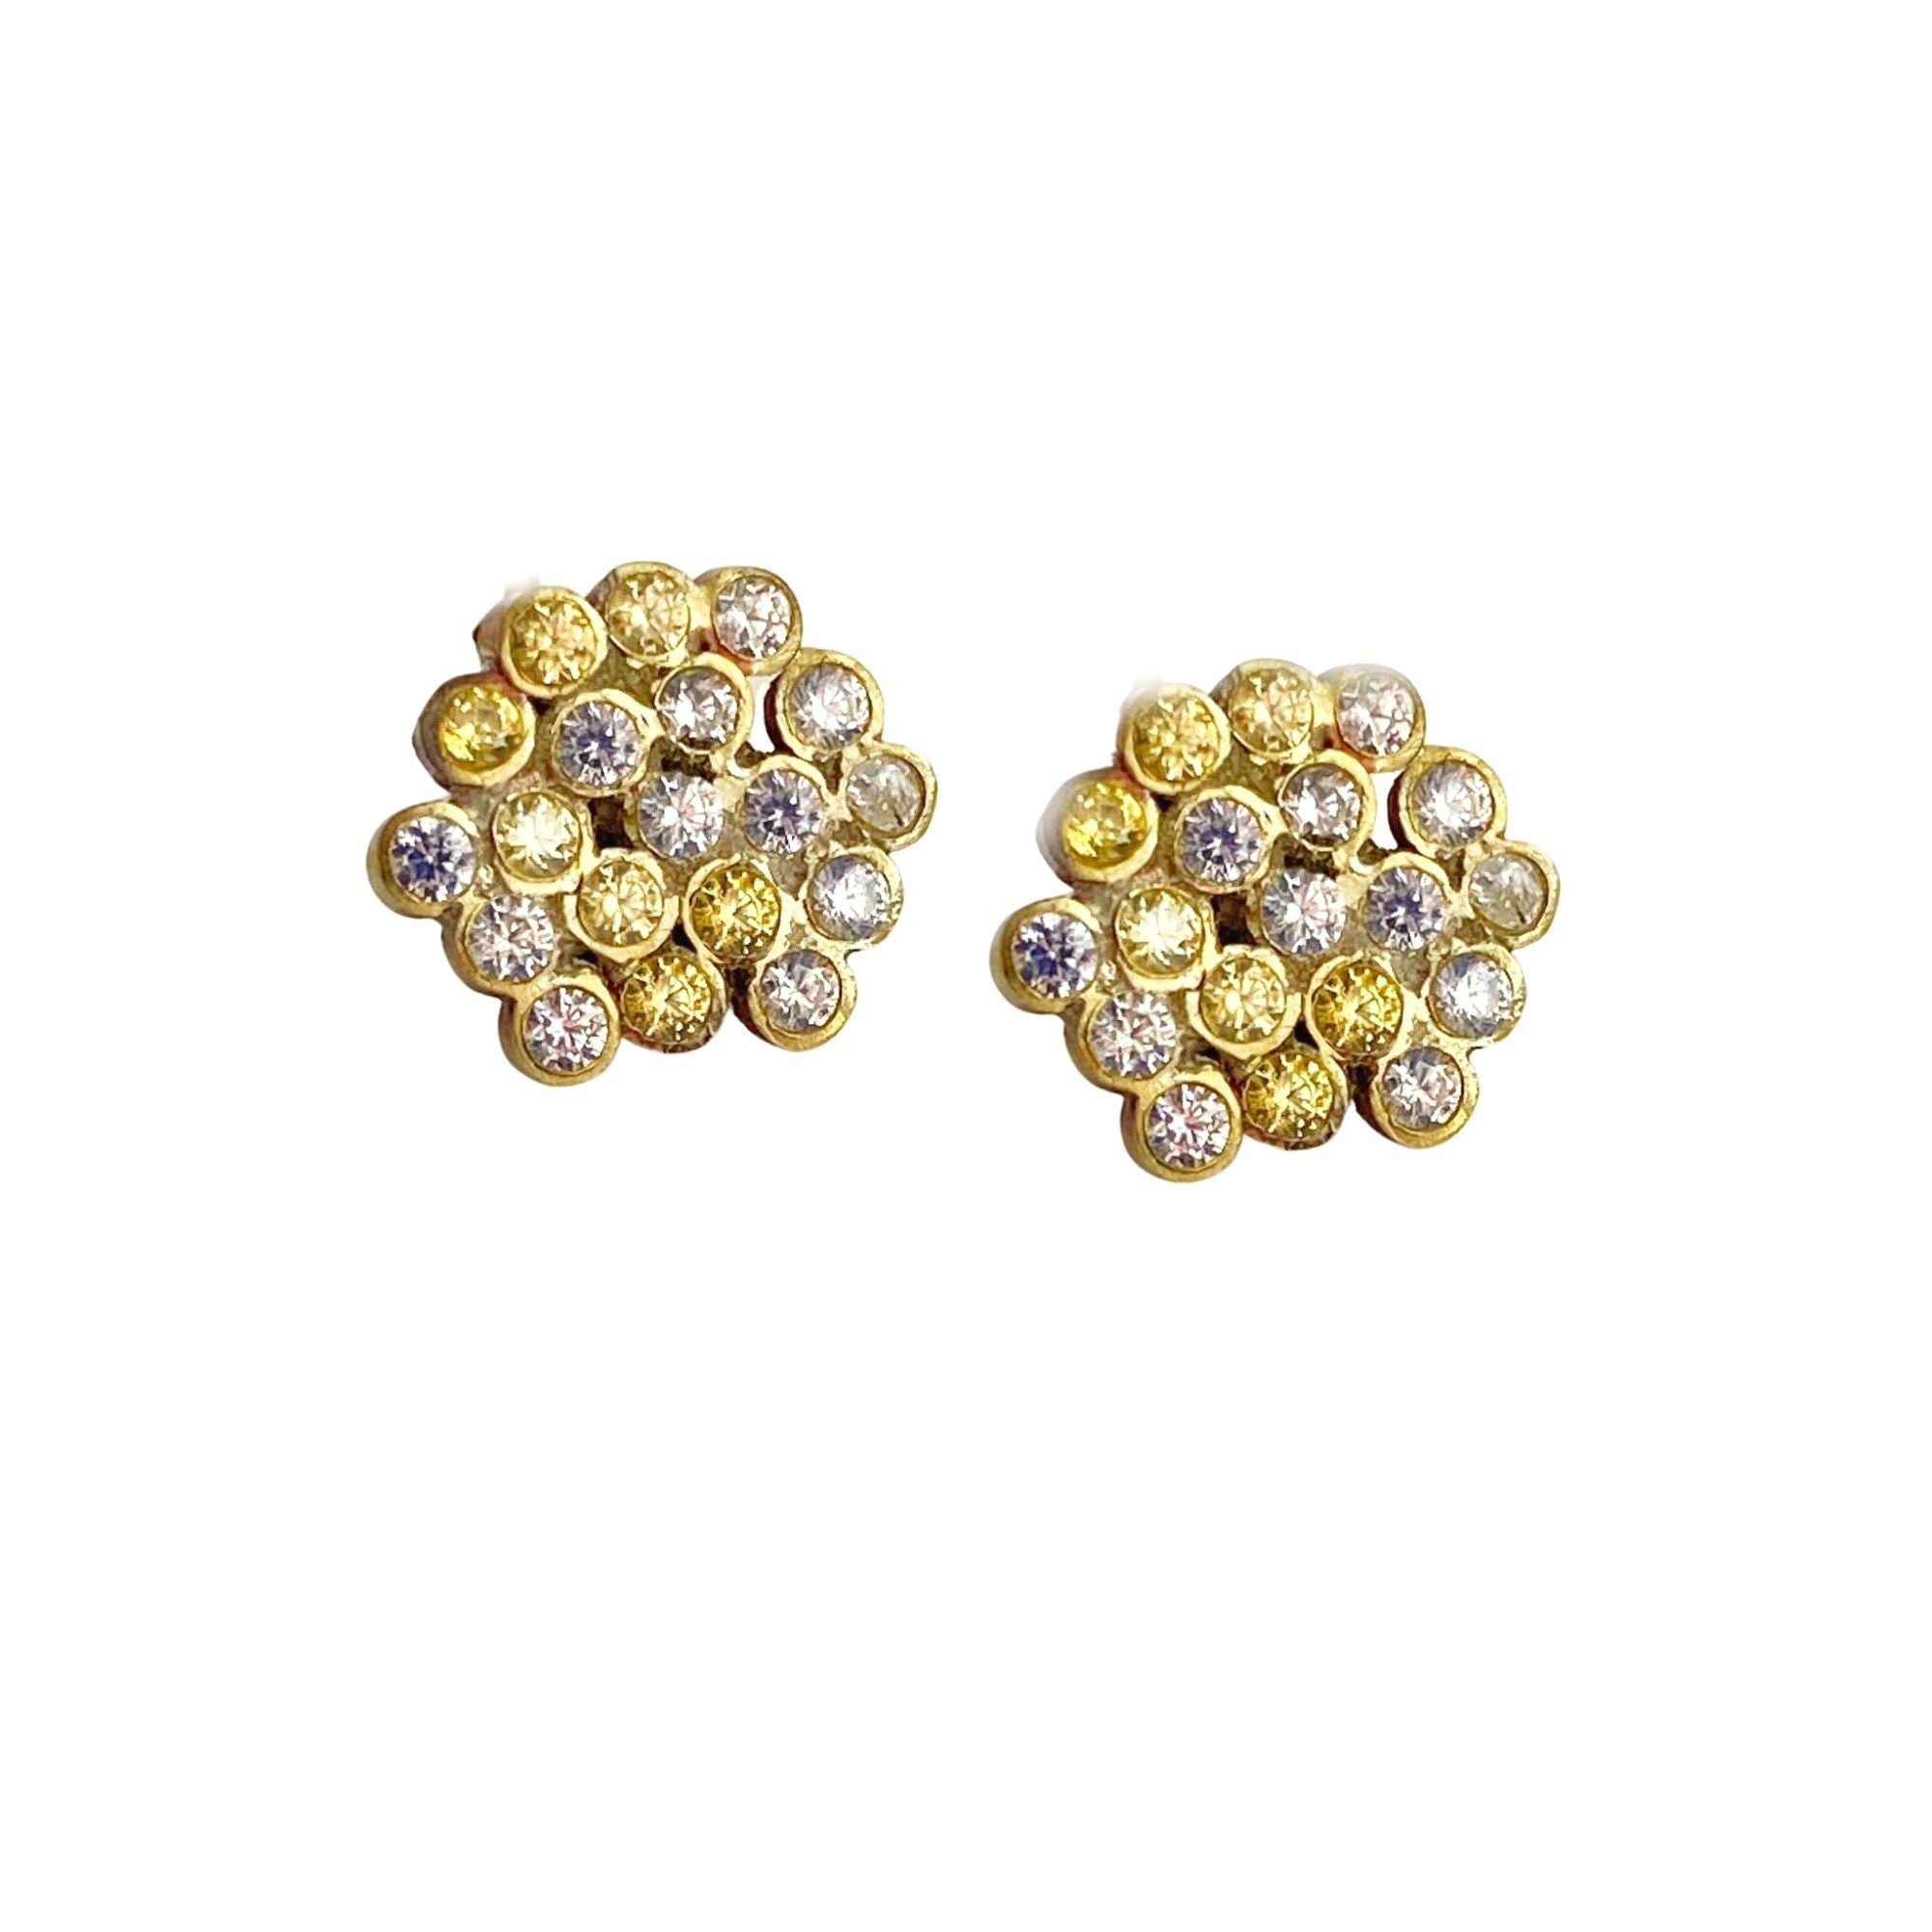 Dance Magic Yellow and White Sapphire Cluster Stud Earrings